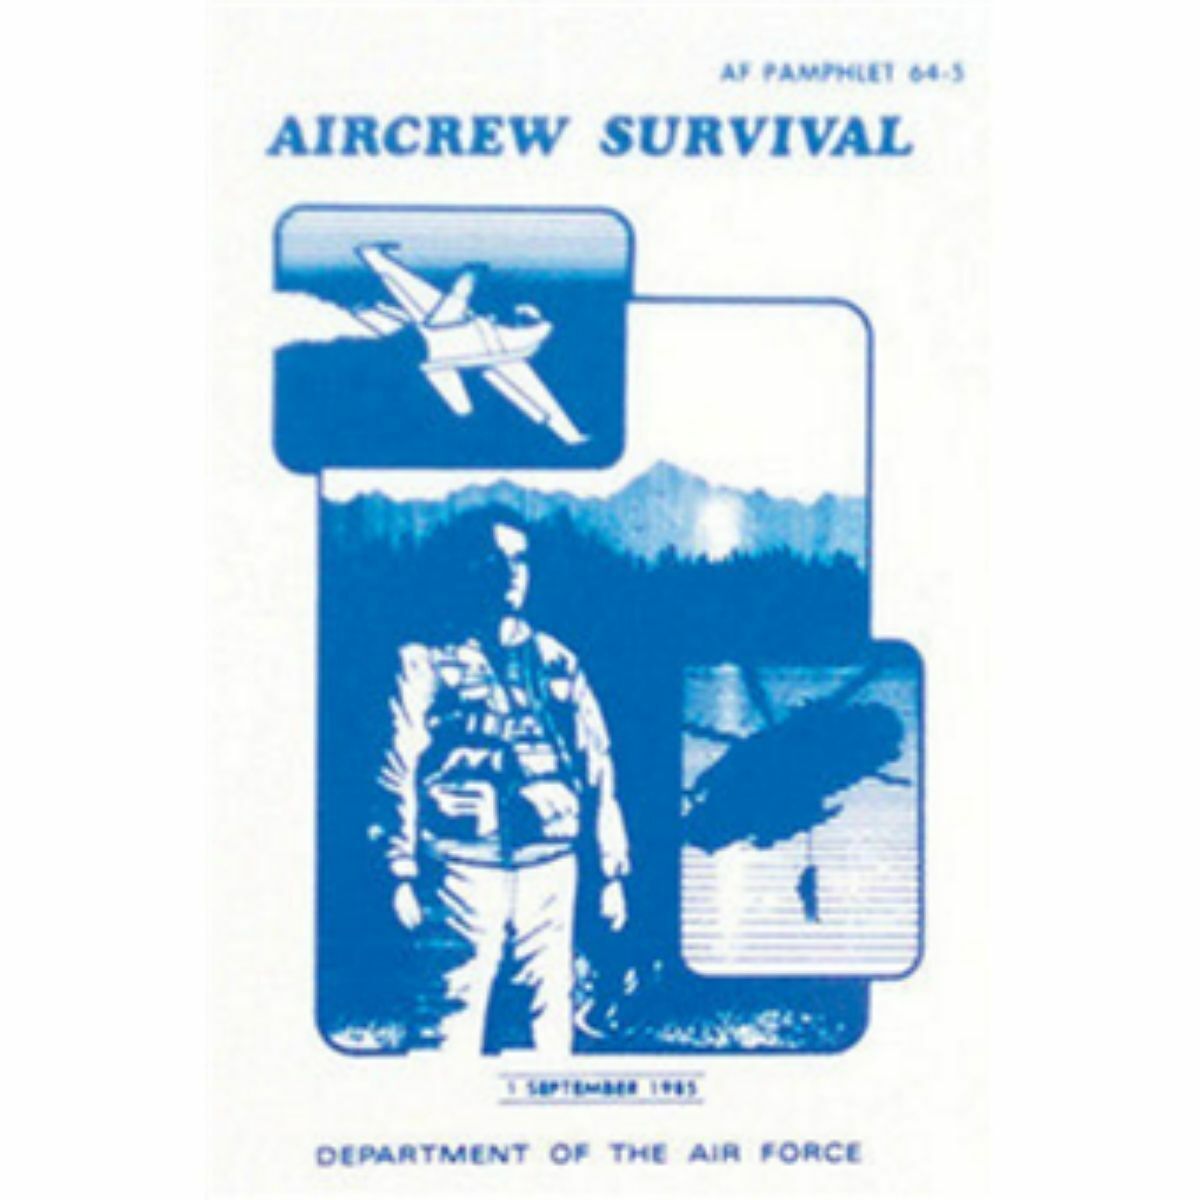 USAF AIR FORCE AIRCREW SURVIVAL BOOK Camping Hunting Outdoorsman AF 64-5 Guide